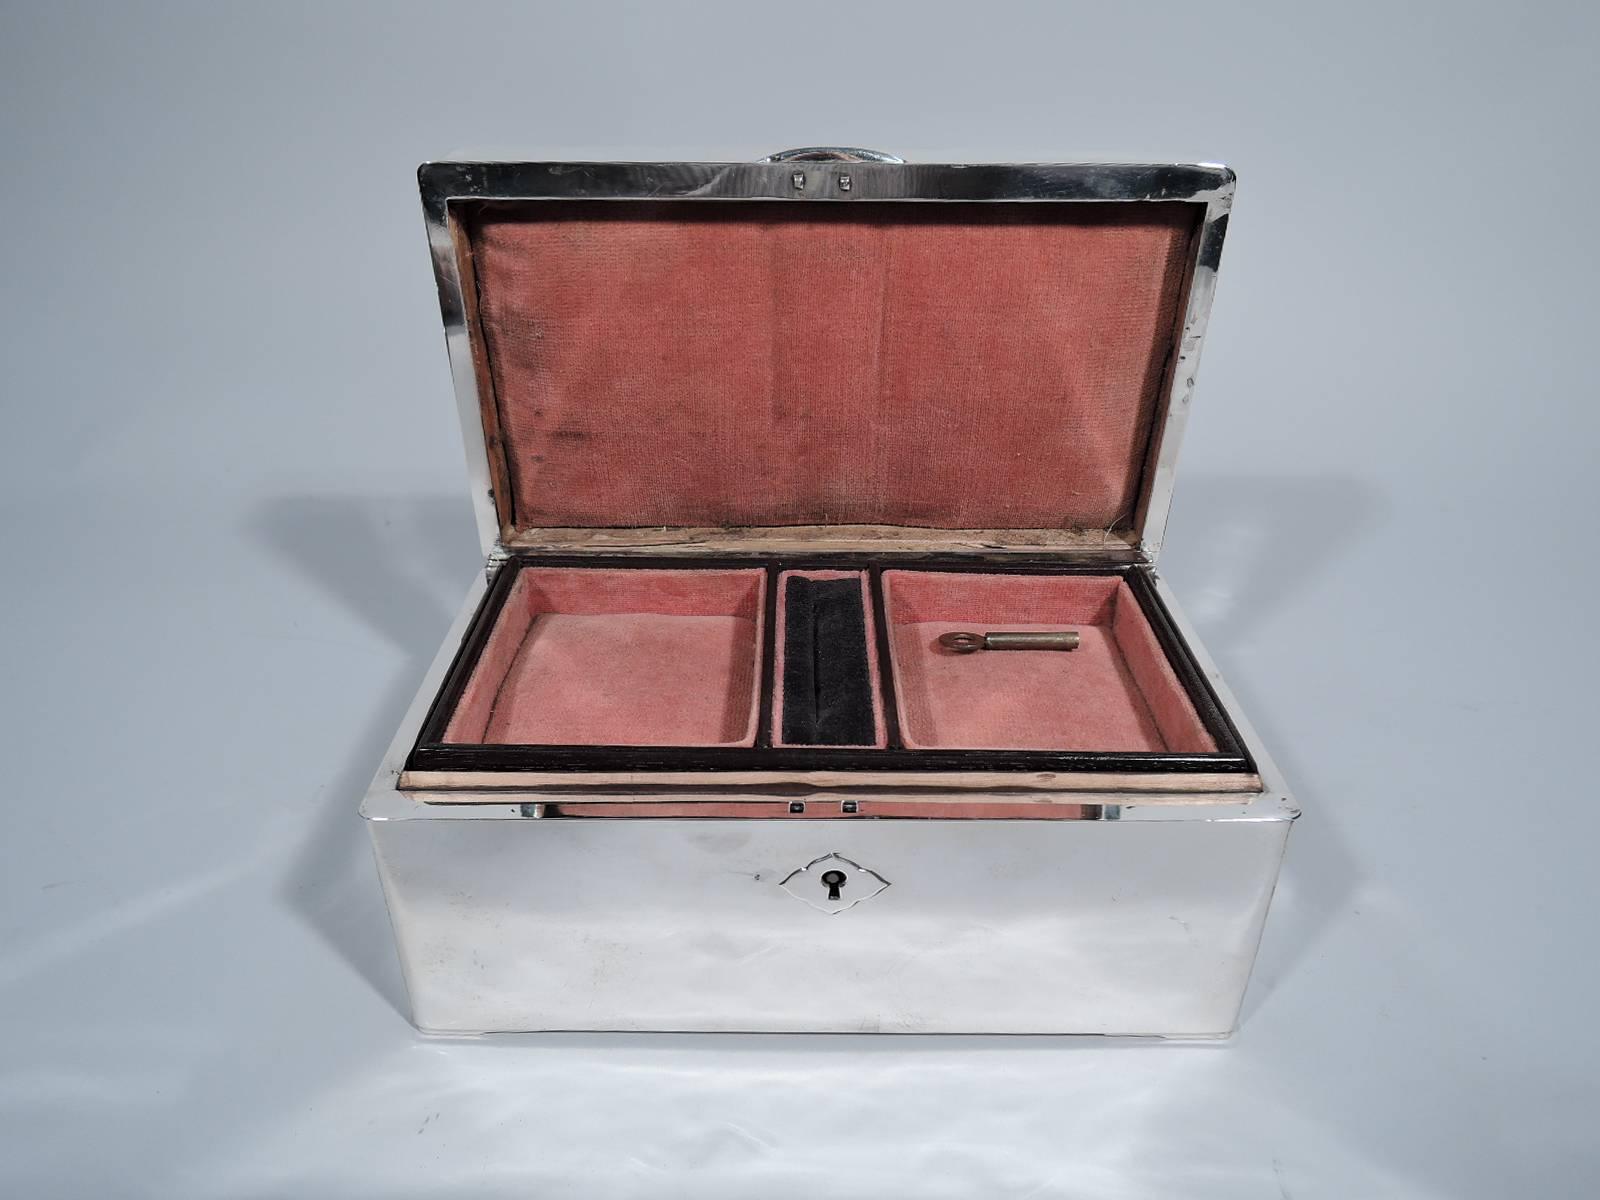 American modern sterling silver jewelry box, circa 1920. Rectangular with straight sides. Cover hinged with curved tab. Keyhole has scrolled lozenge plate. With key. Box and cover interior lined with salmon pink velvet. Detachable stained-wood tray